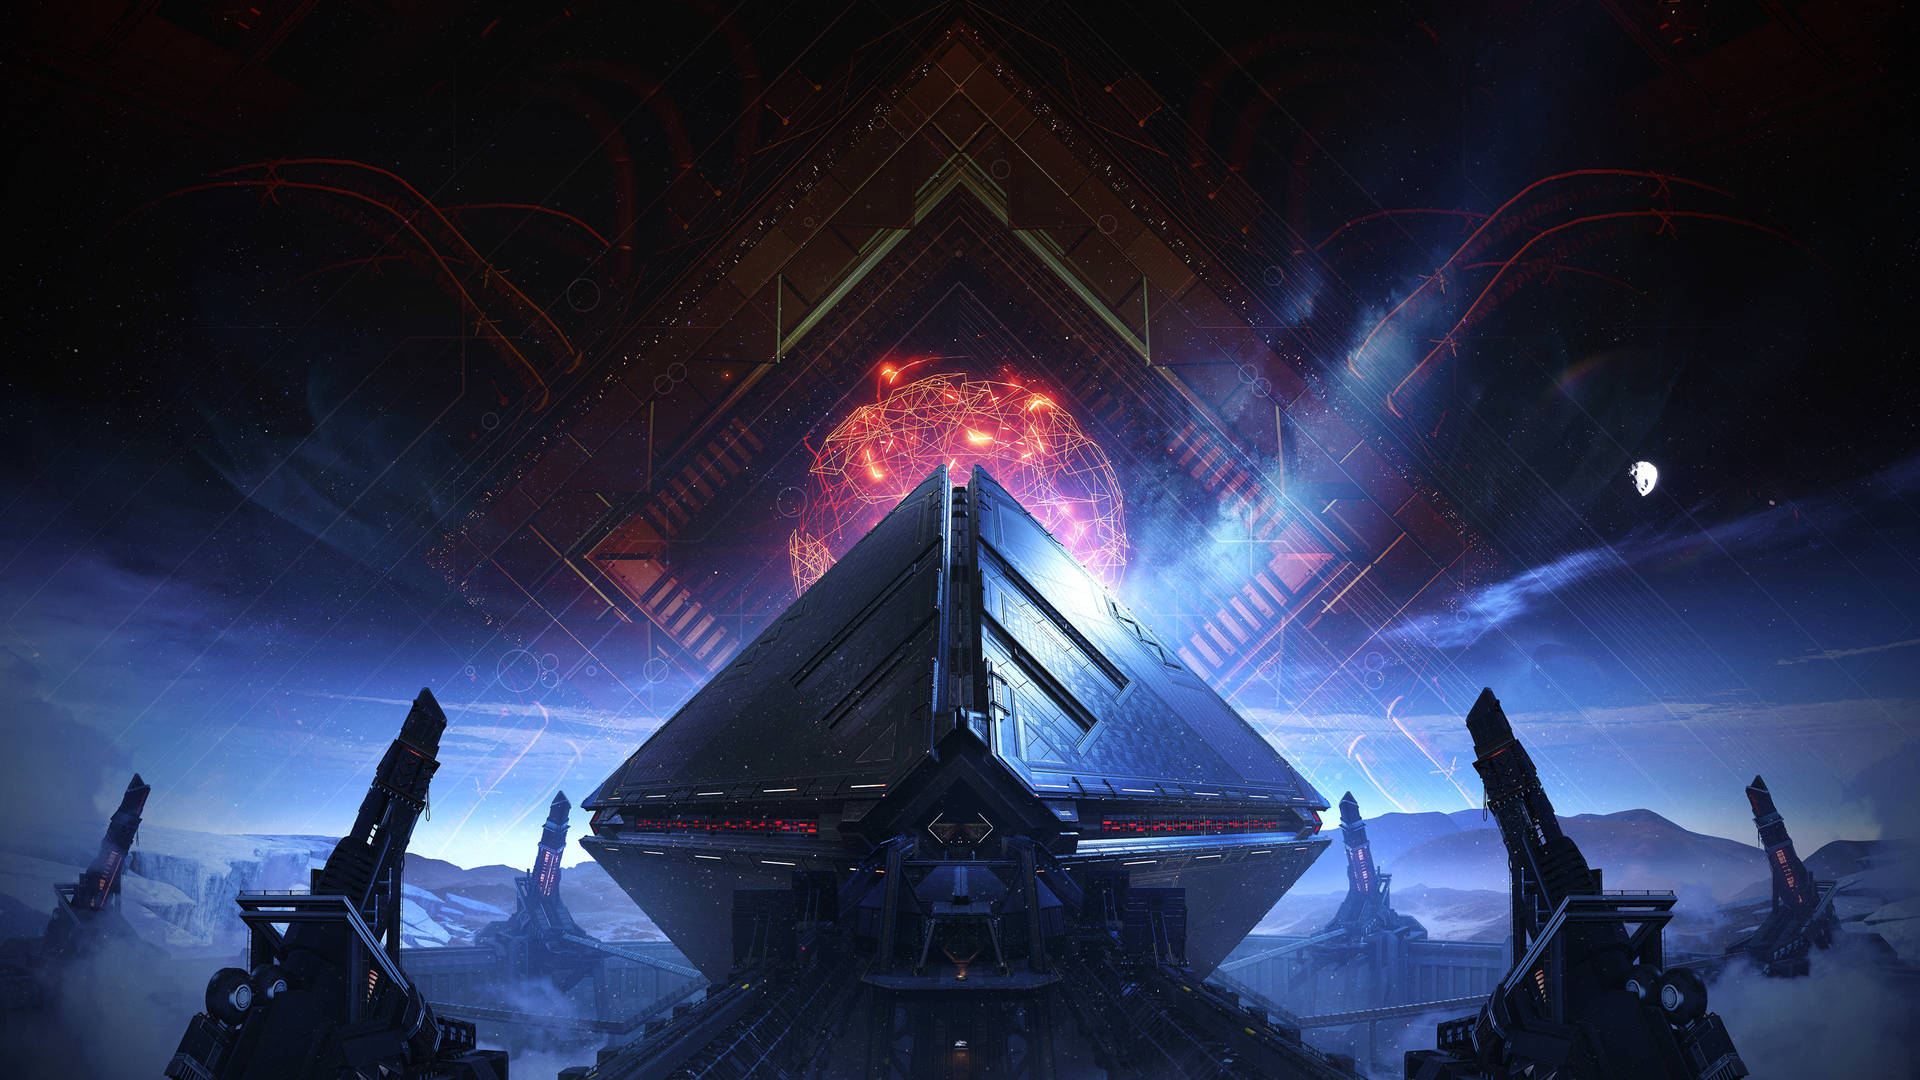 Destiny 2 3840X2160 Wallpaper and Background Image